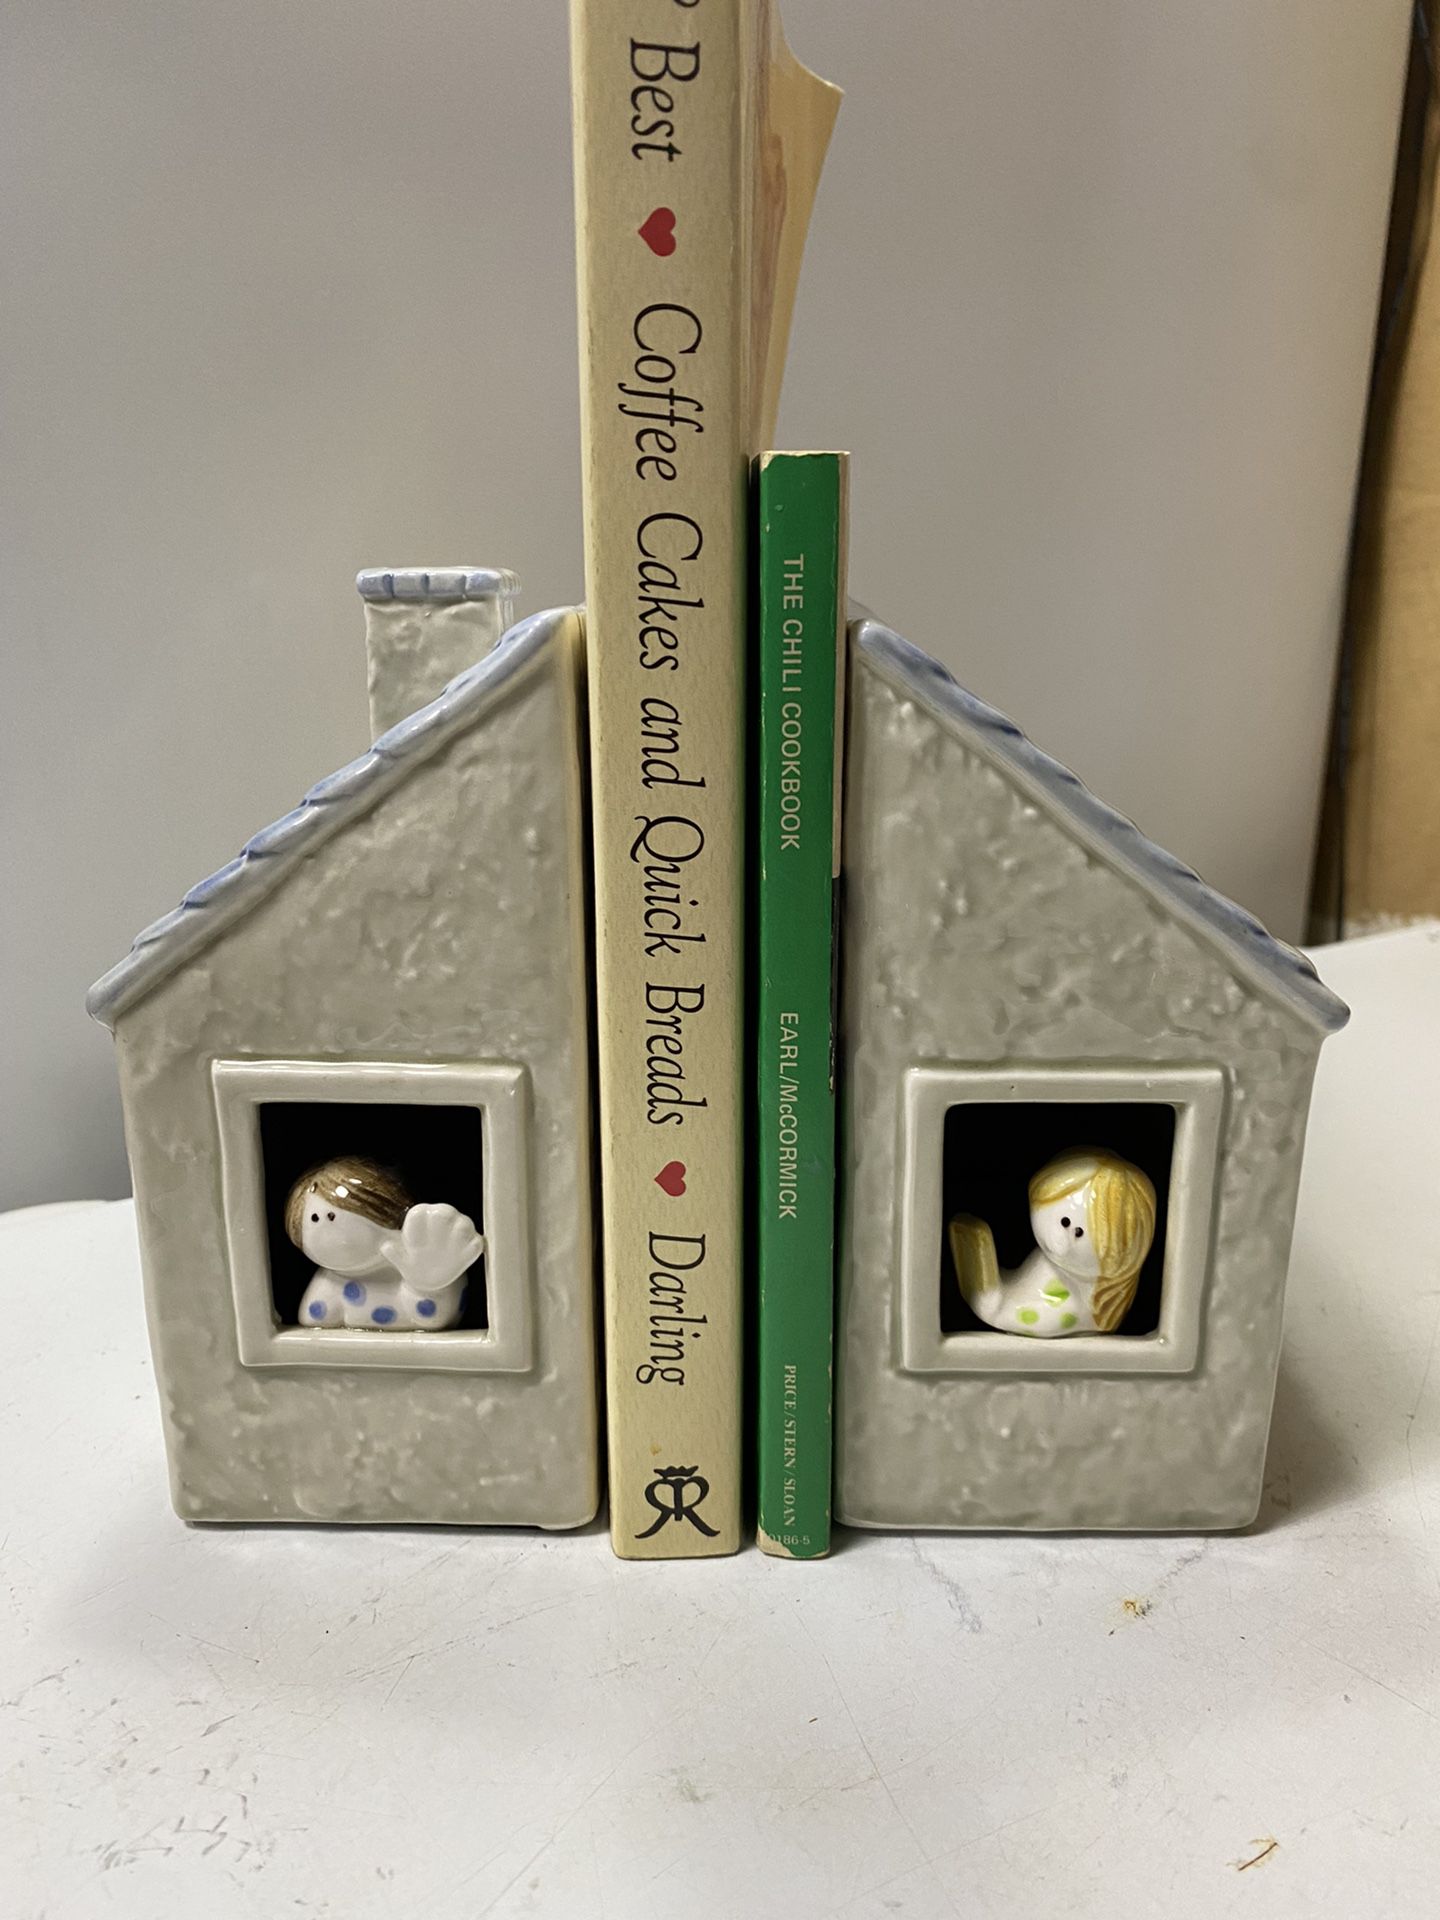 Vtg 1976 Fitz & Floyd hand painted ceramic Children's House bookends home decor library. 